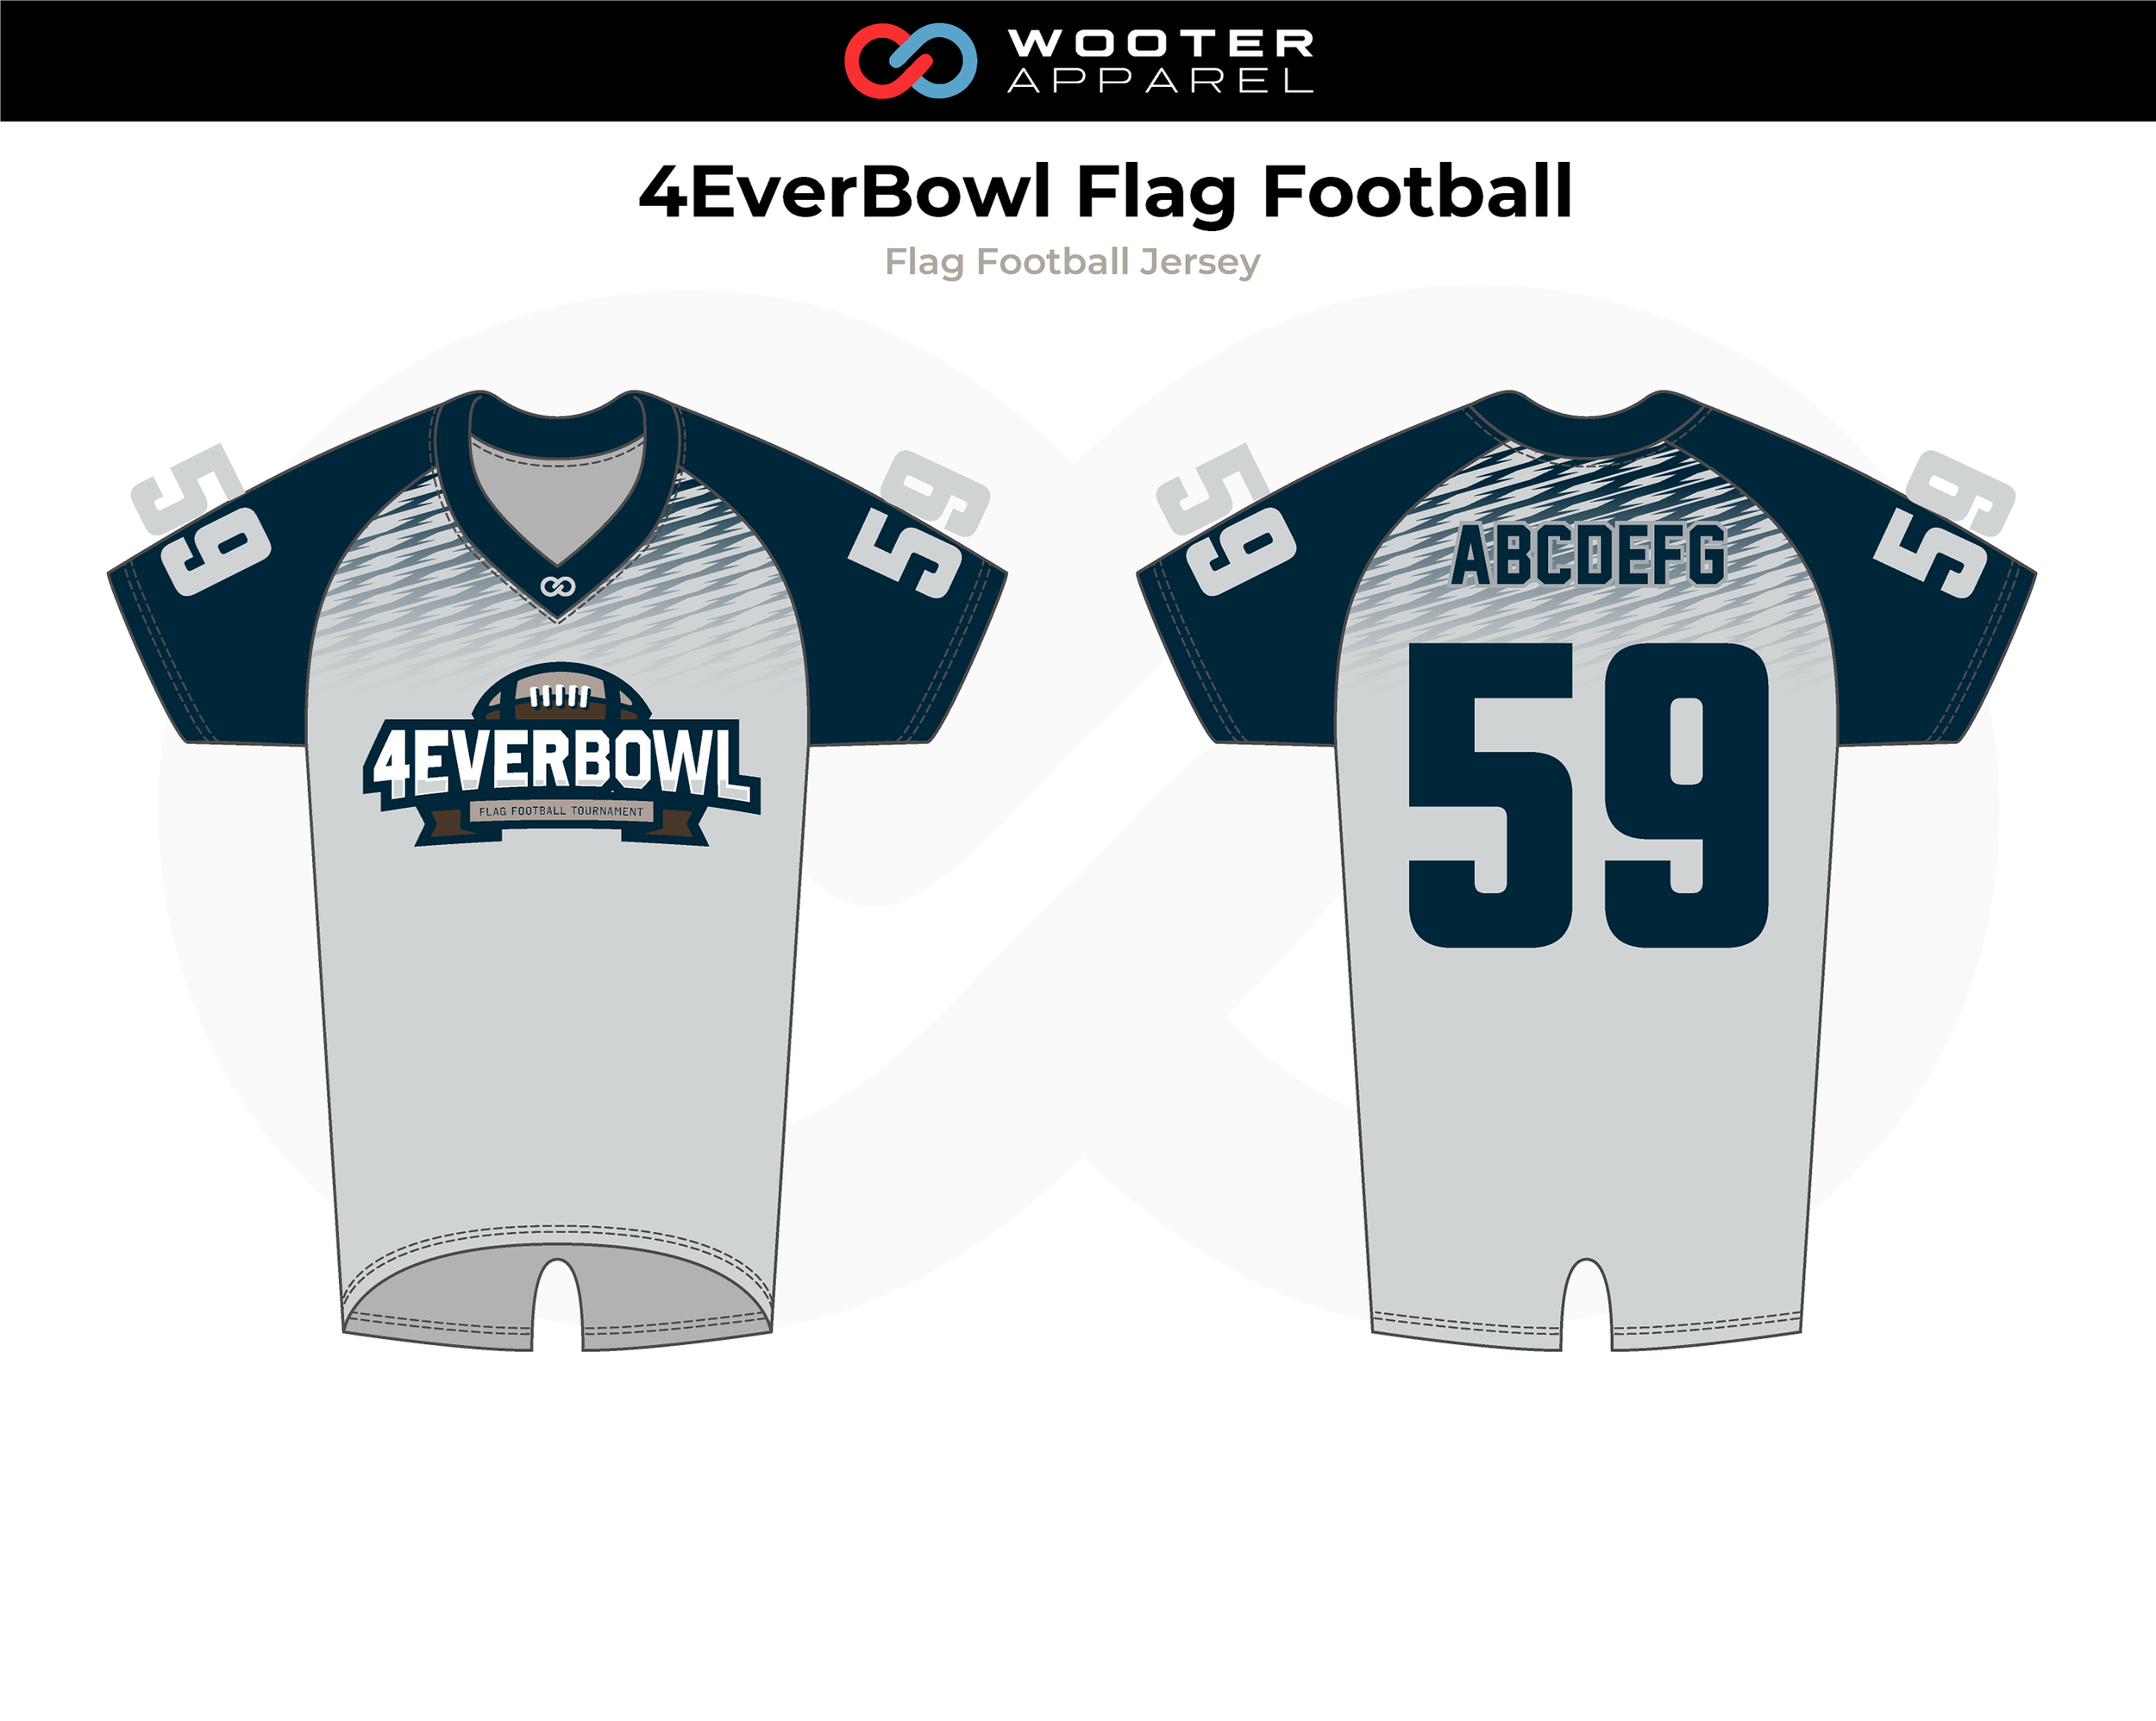 Flag Football Designs | Design Your Own Flag Football Uniforms | Wooter ...